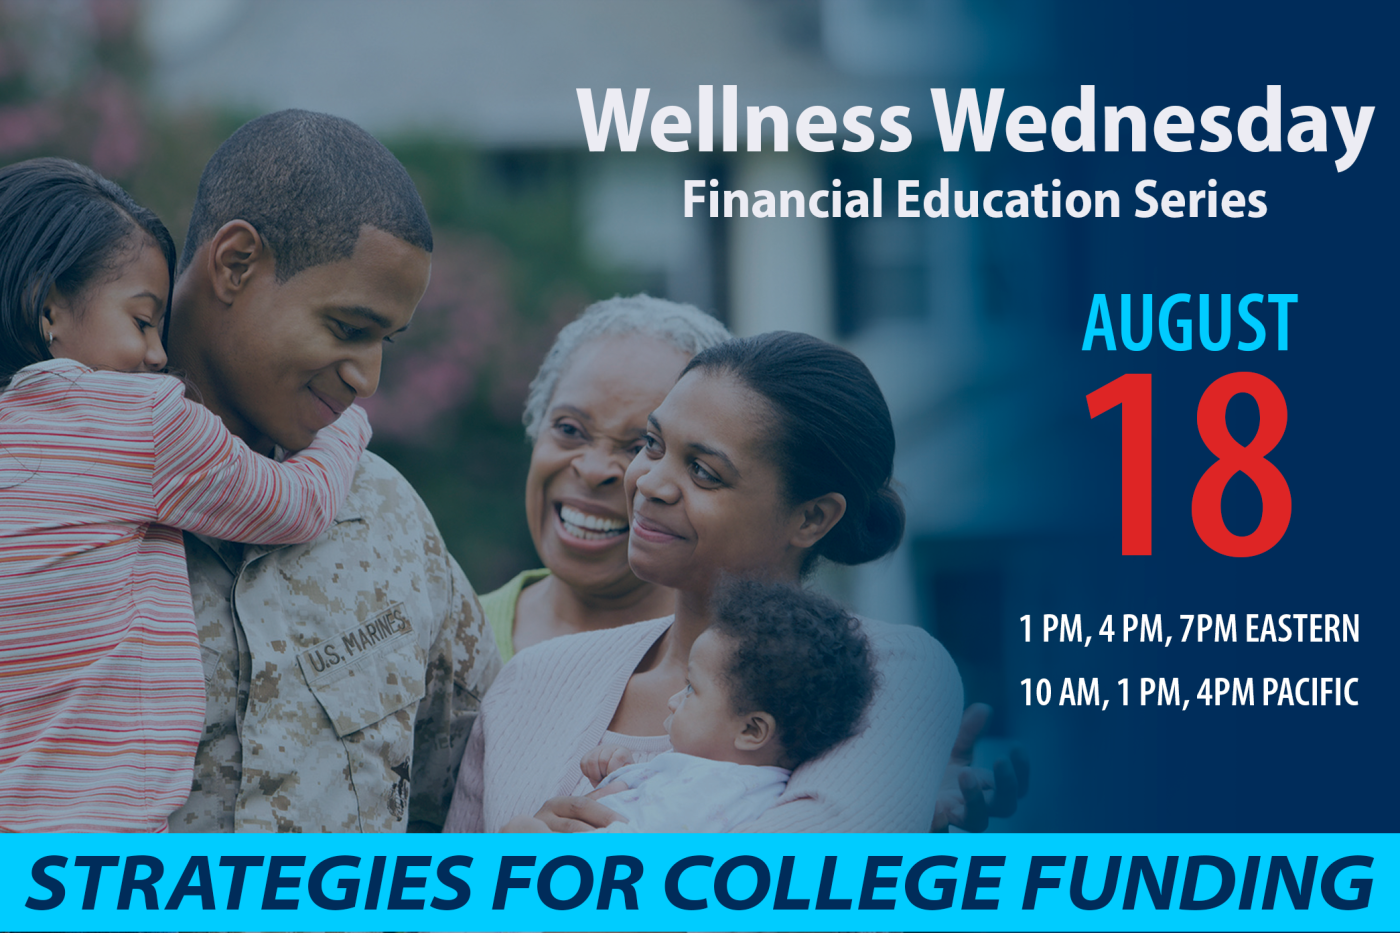 Wellness Wednesdays seminar for Aug 18 on paying for college